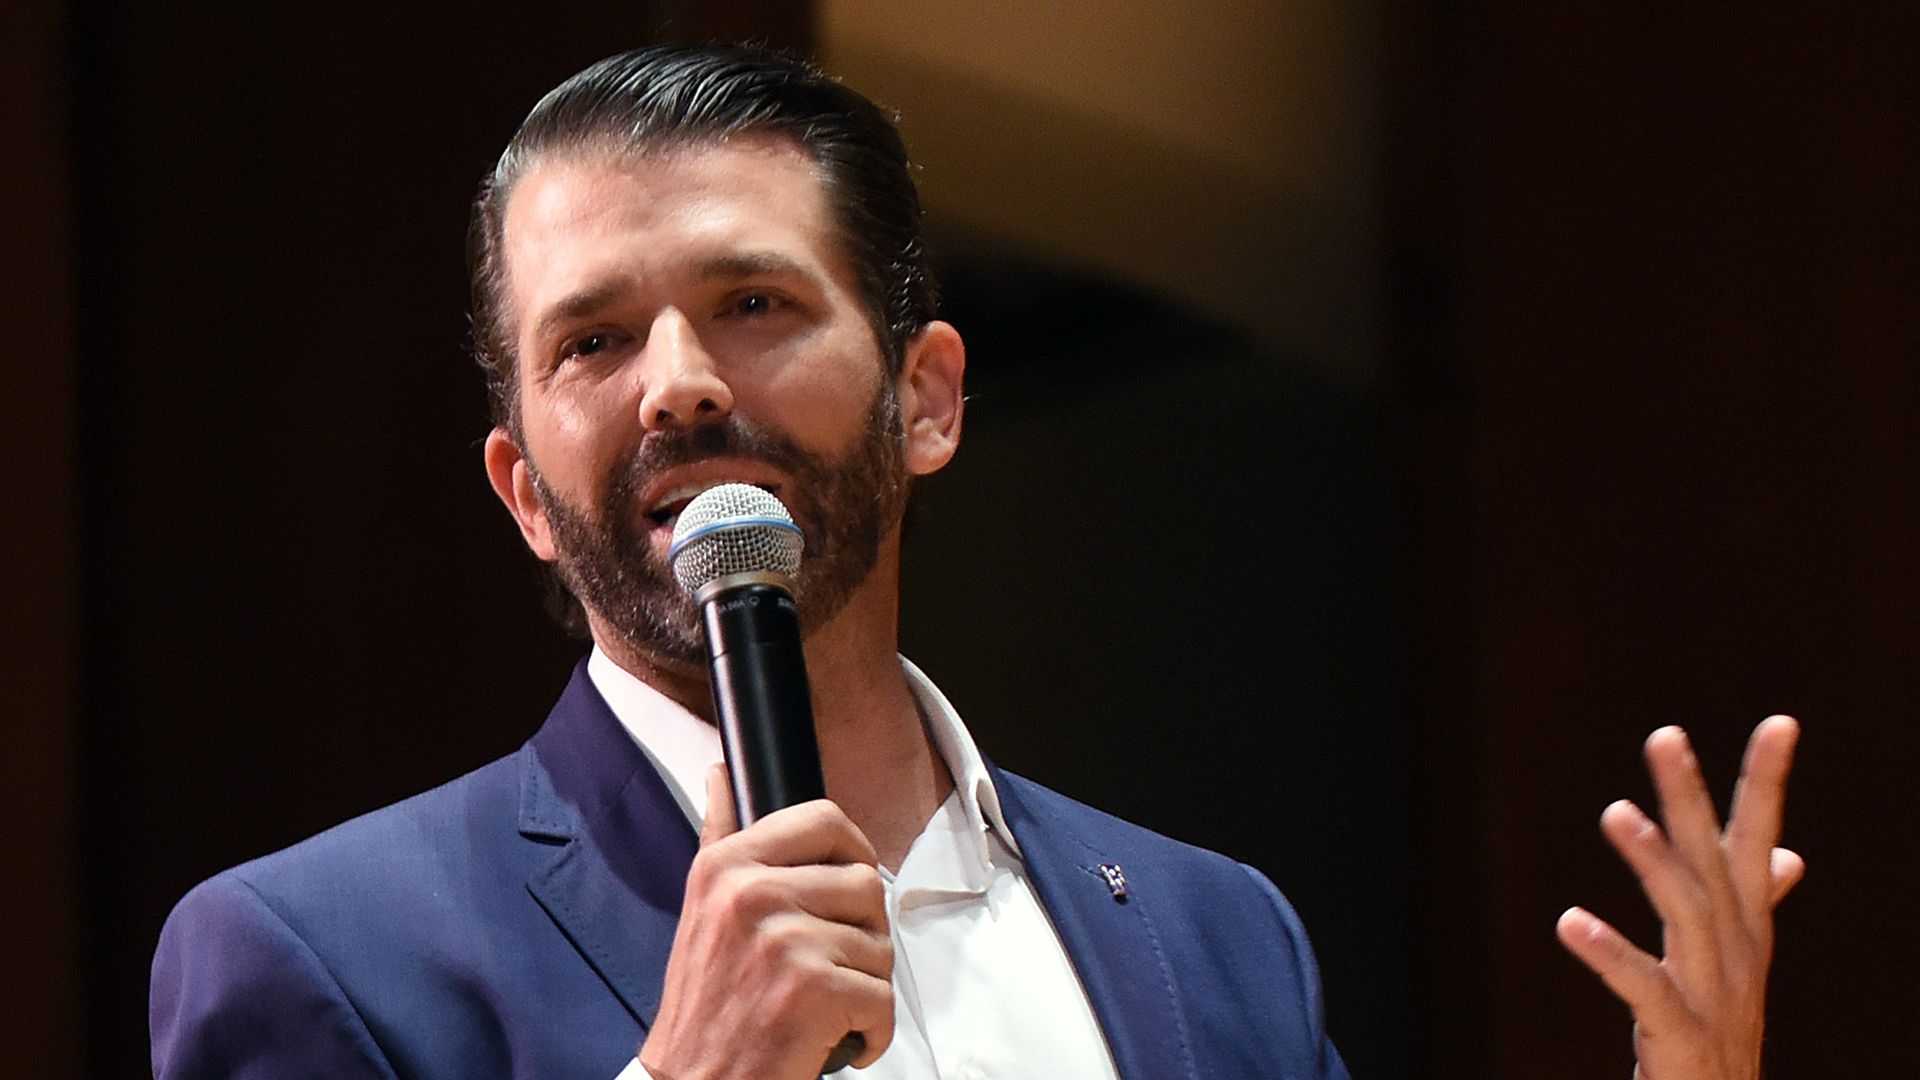 In this image, Donald Trump. Jr. stands and talks into a microphone.